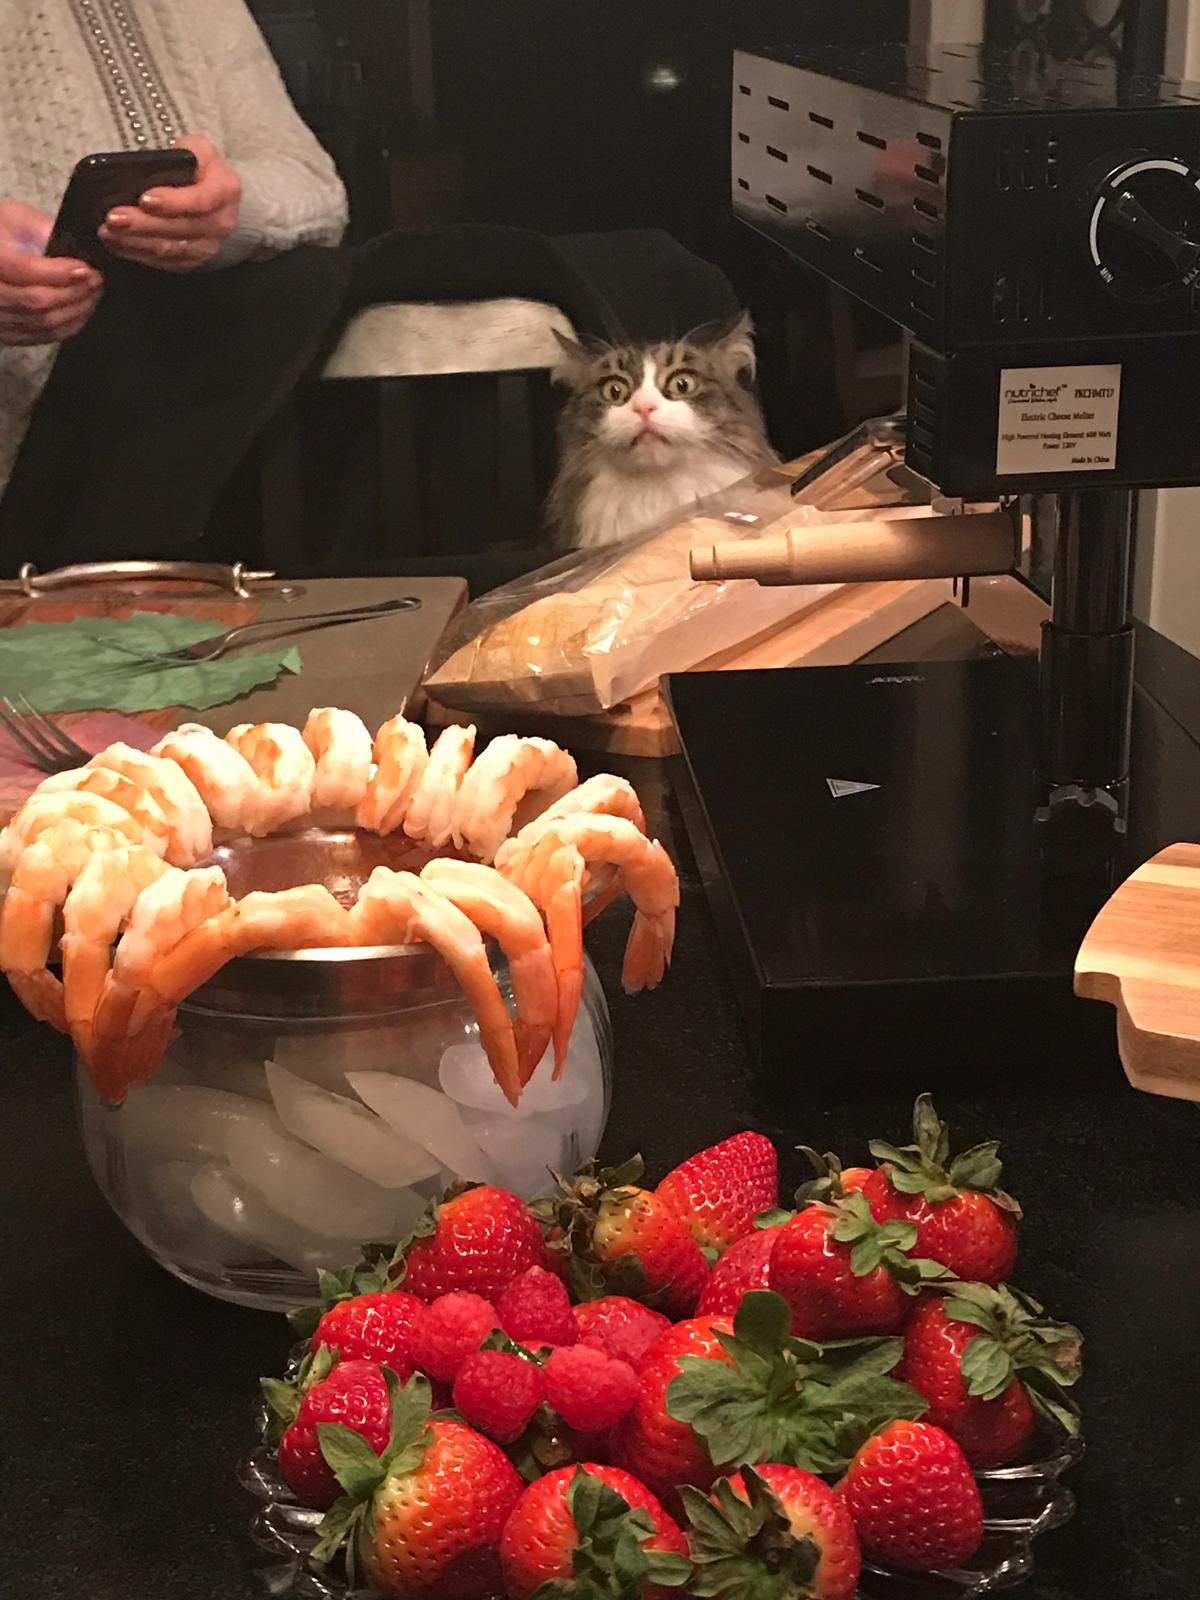 My mother in law's cat is obsessed with shrimp. She makes this face whenever there is shrimp on the table.